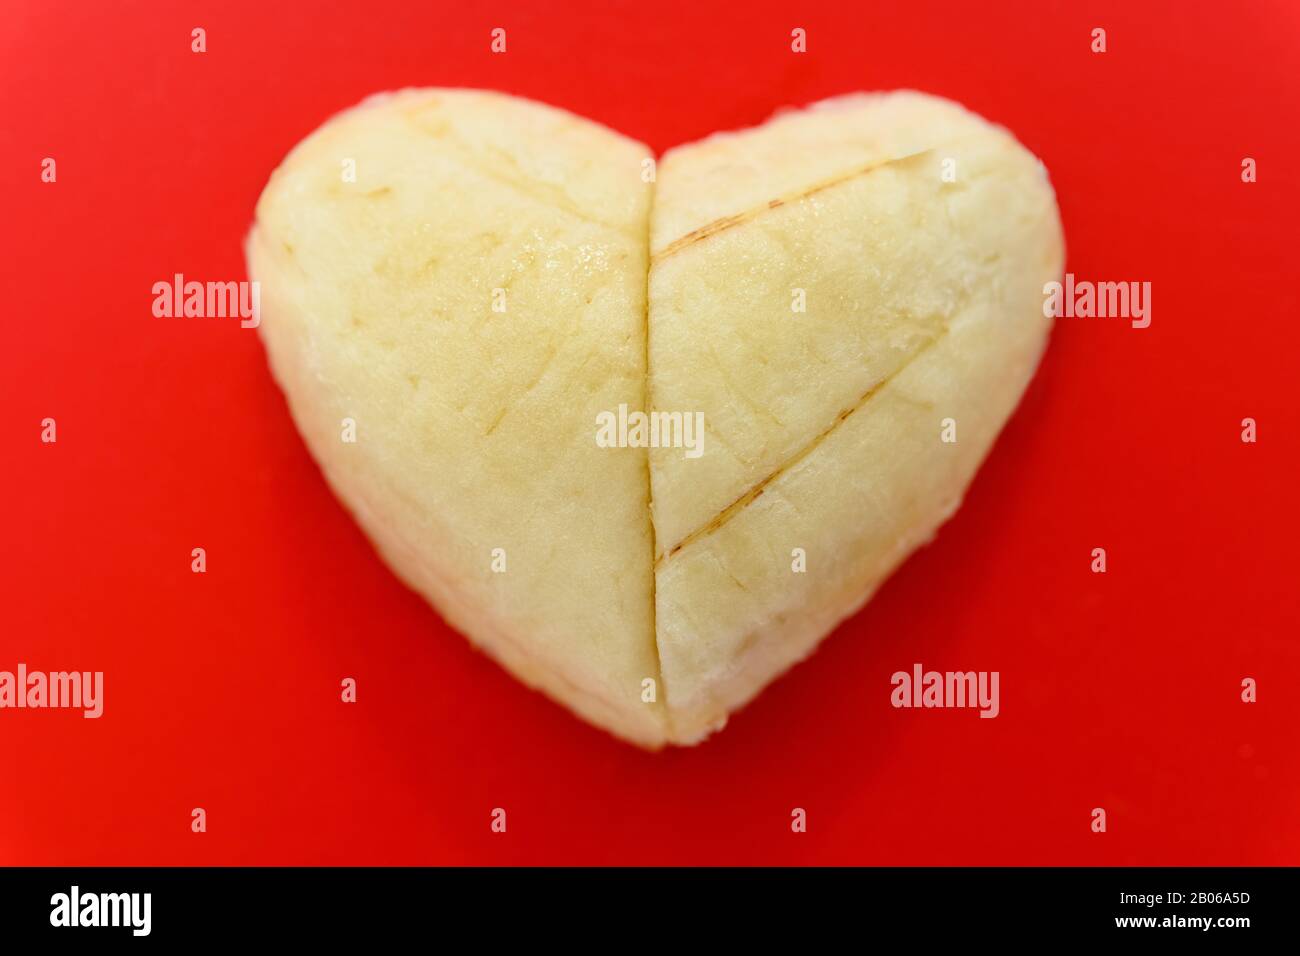 two slices of banana shaped as a heart on red background Stock Photo